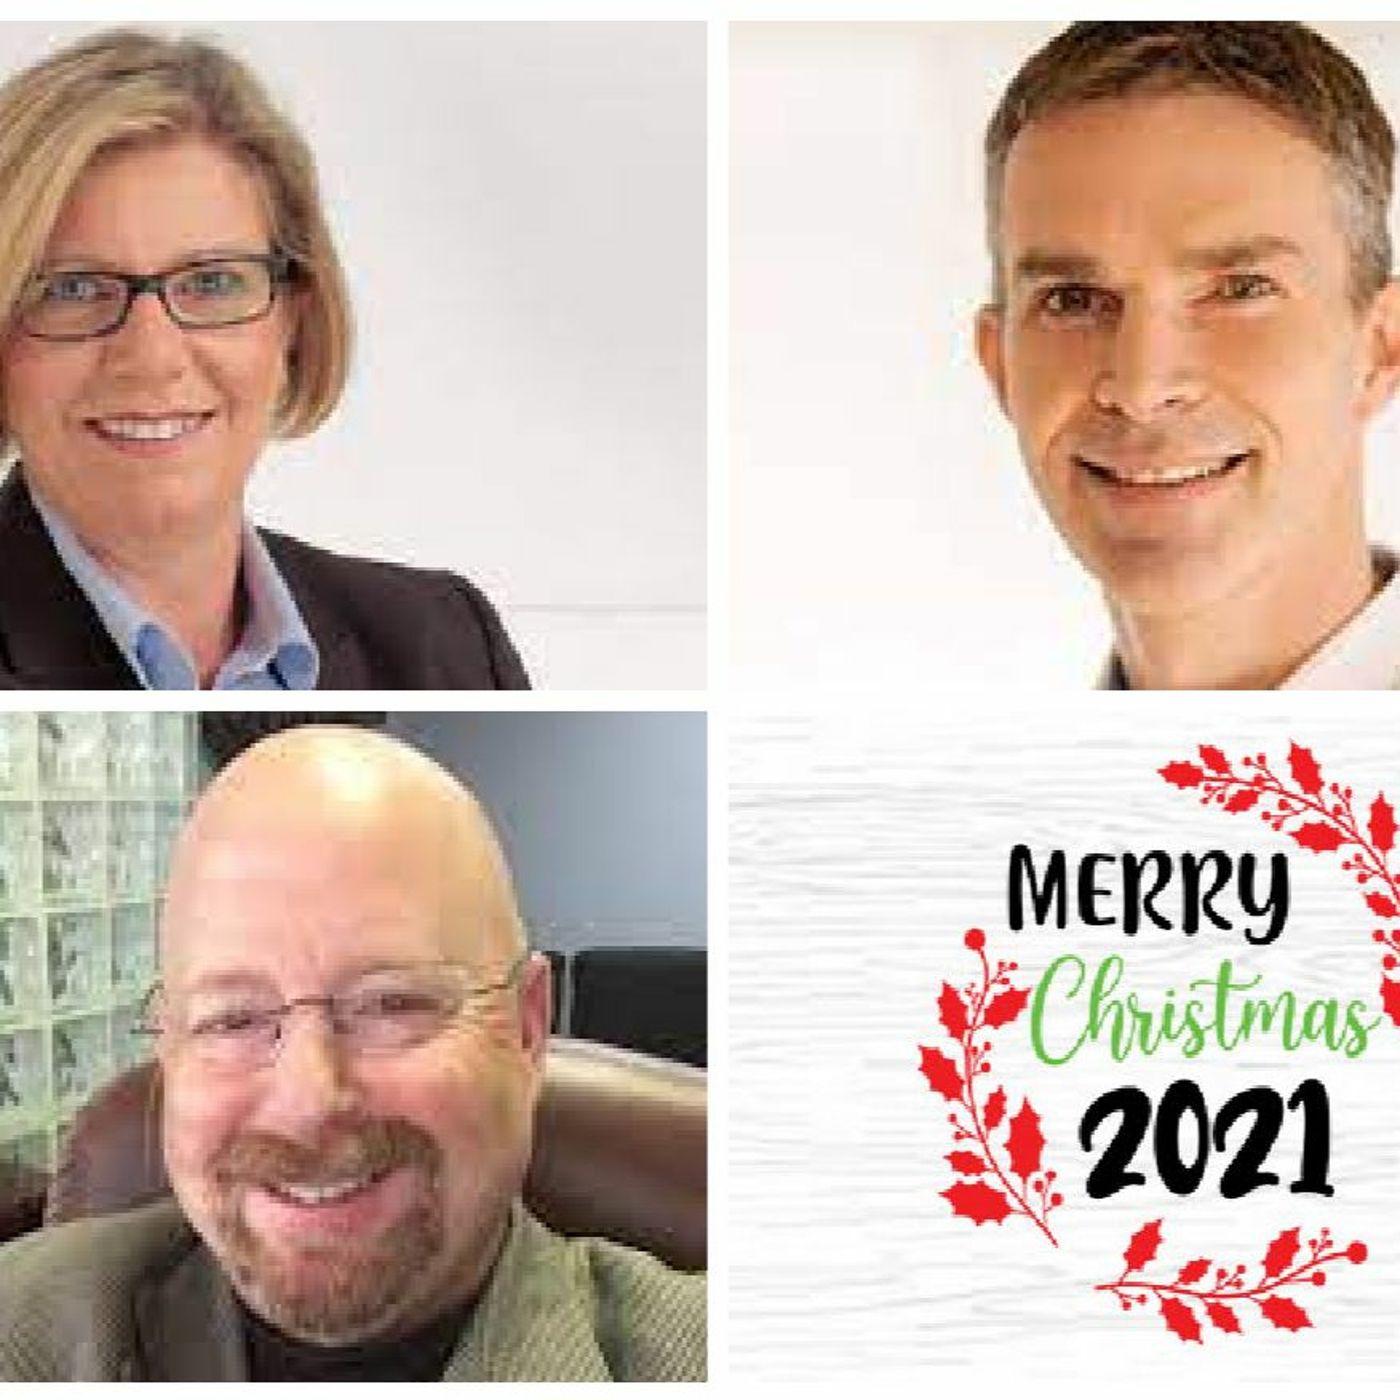 Christmas Eve 2021, IFES, EDPA Foundation, Polls and CES oh my!